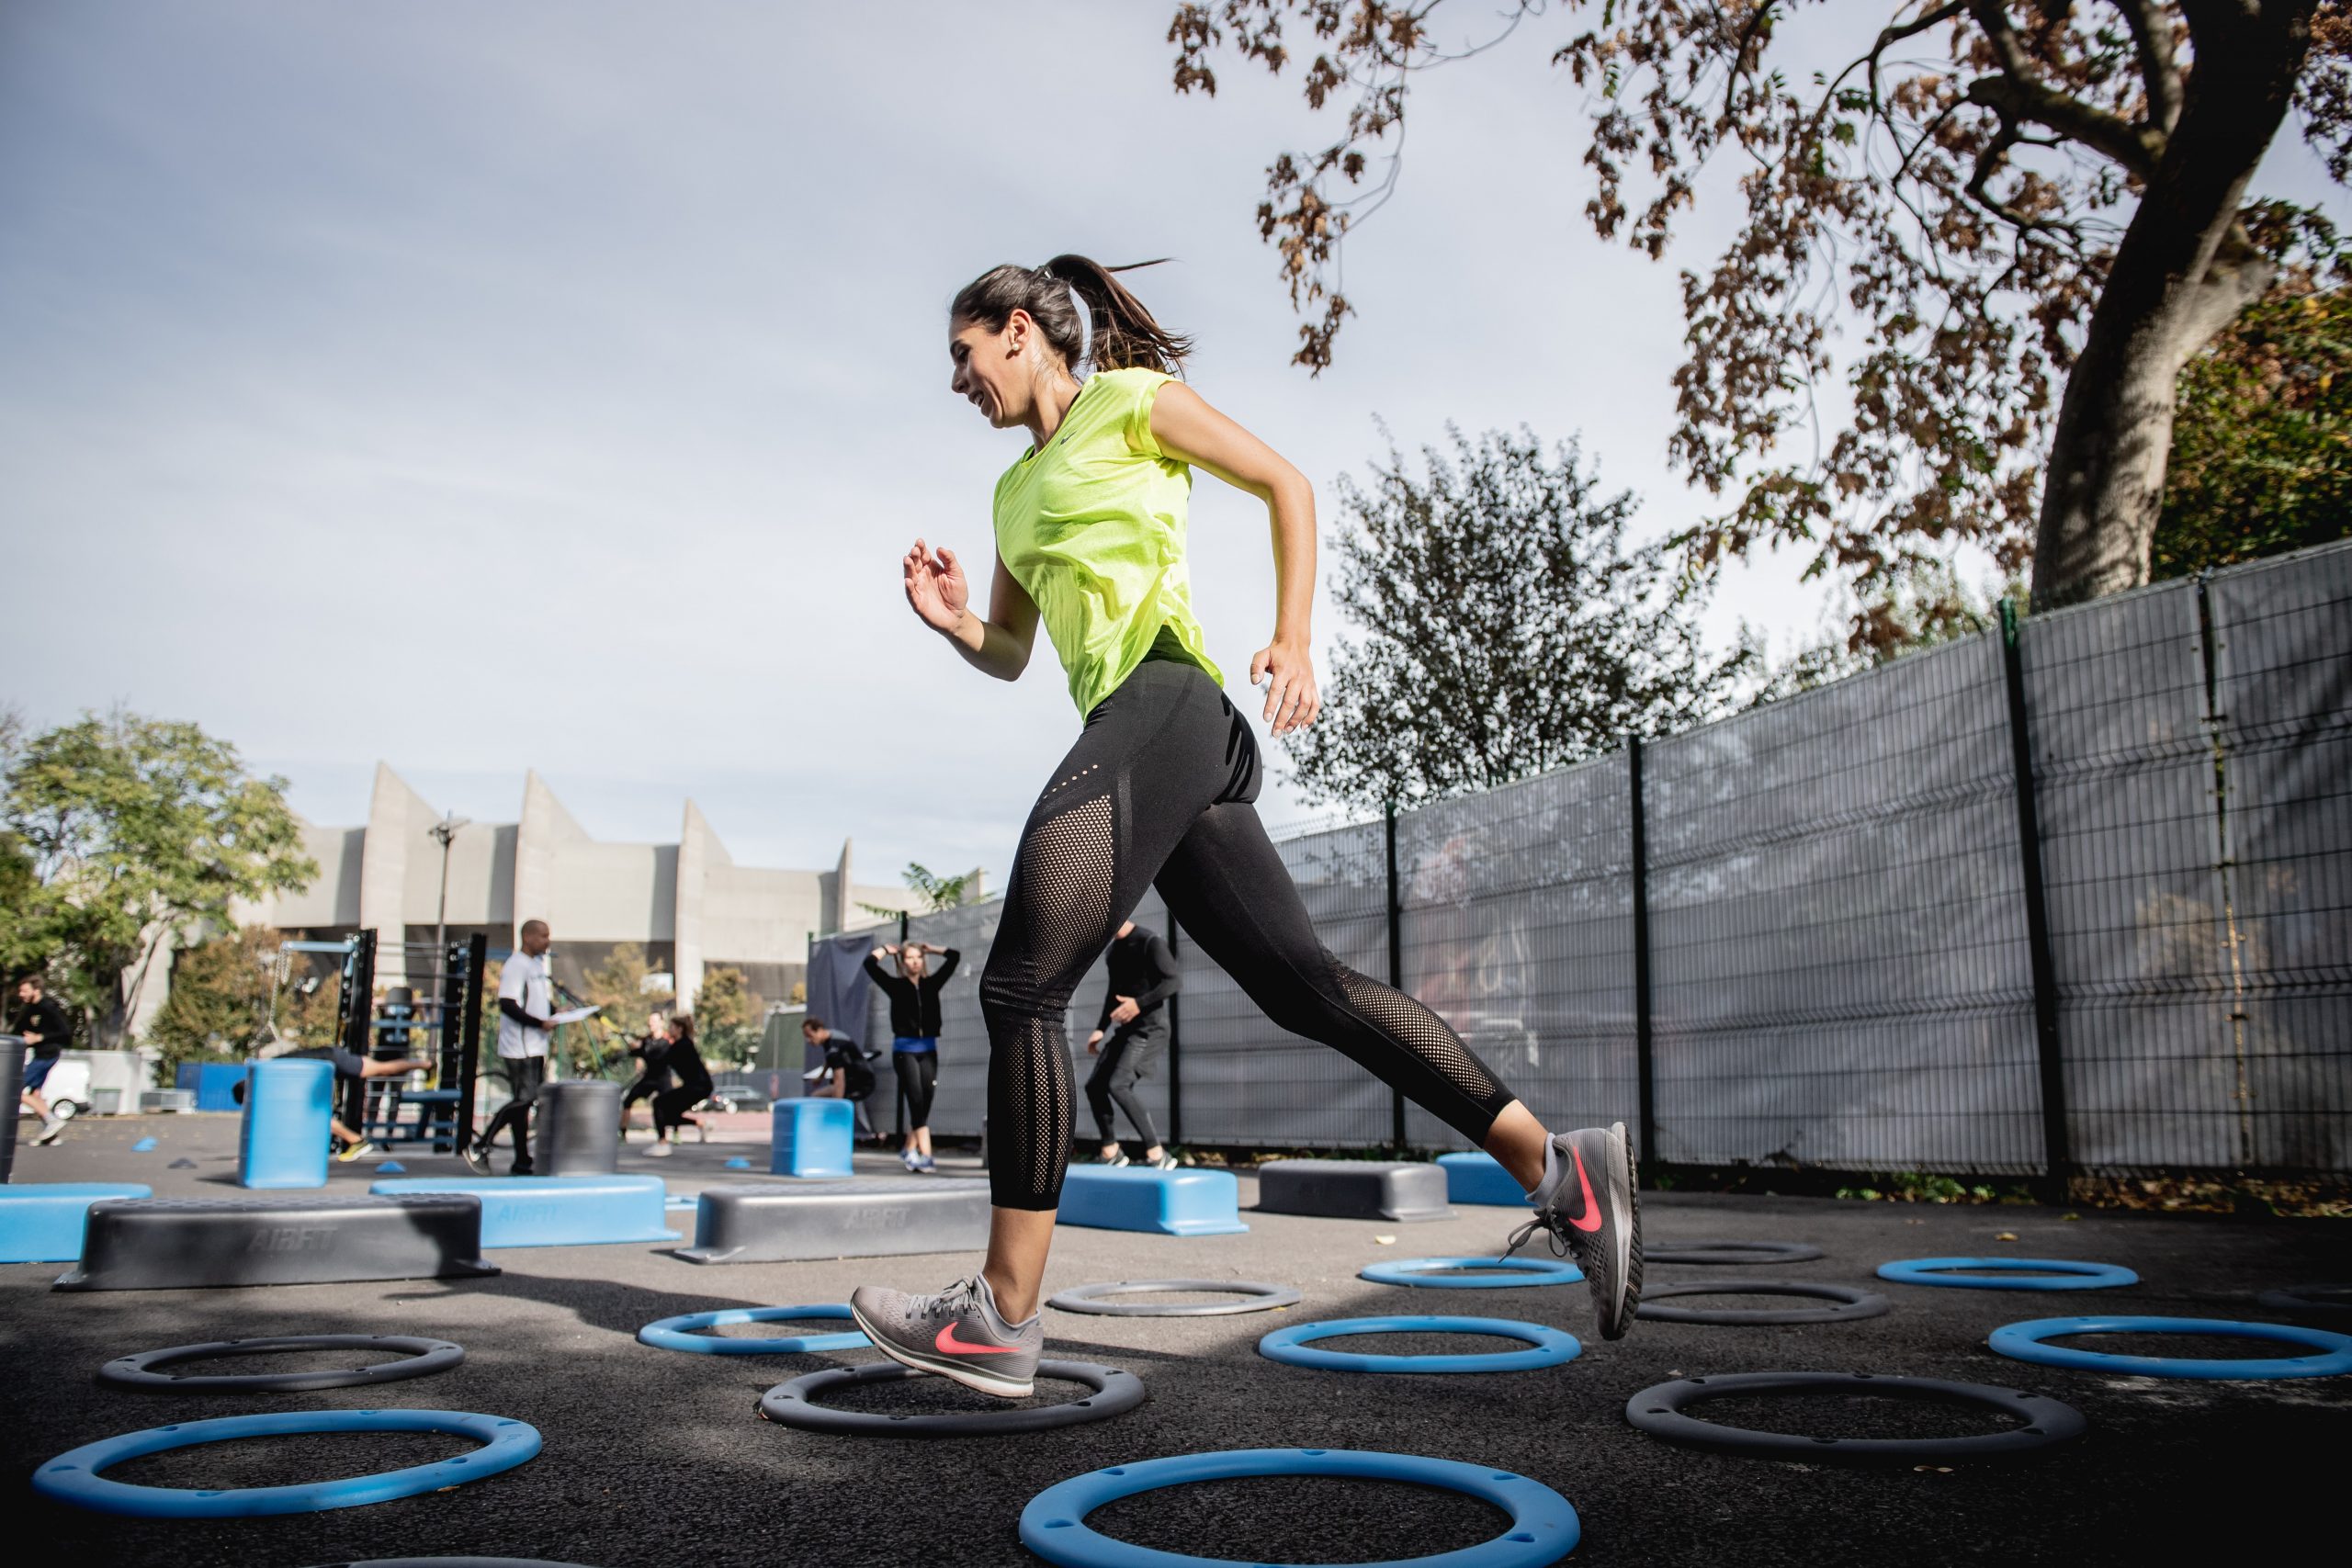 Woman running during circuit training exercise in a city